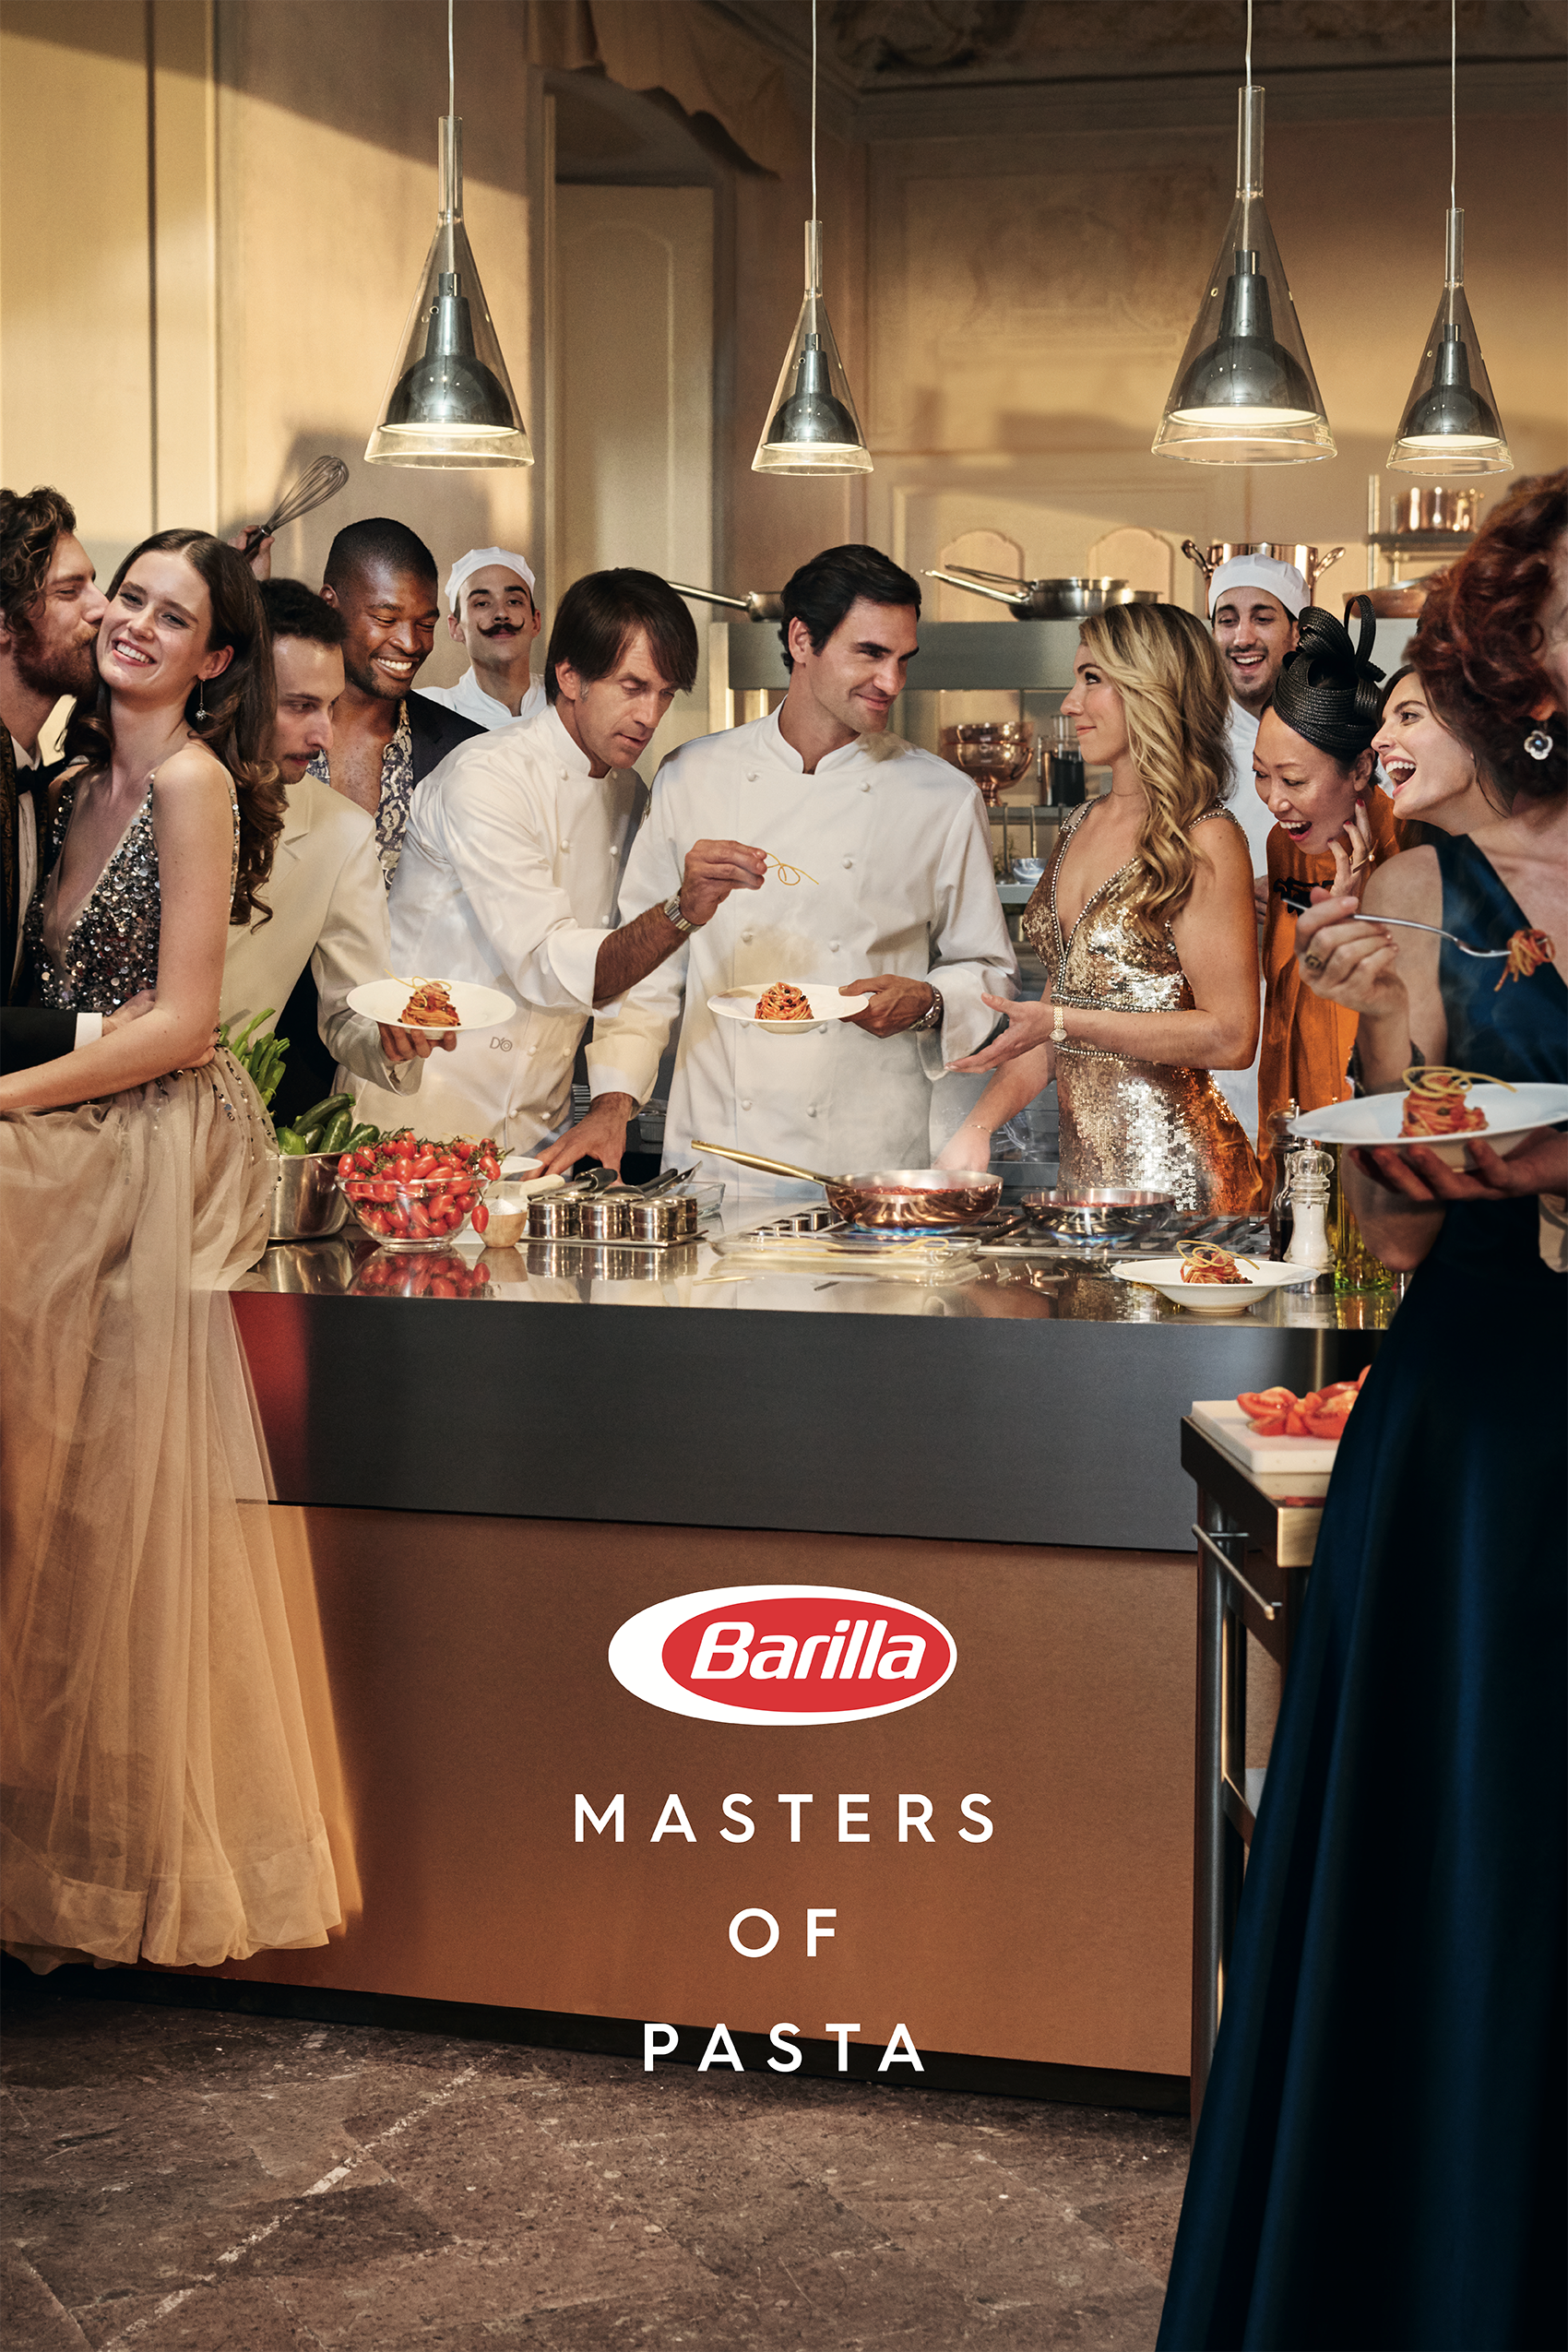 72NL_Barilla_The_Party_RF+DO+MS_6Sheet_KV1_Redelivery_1478.png